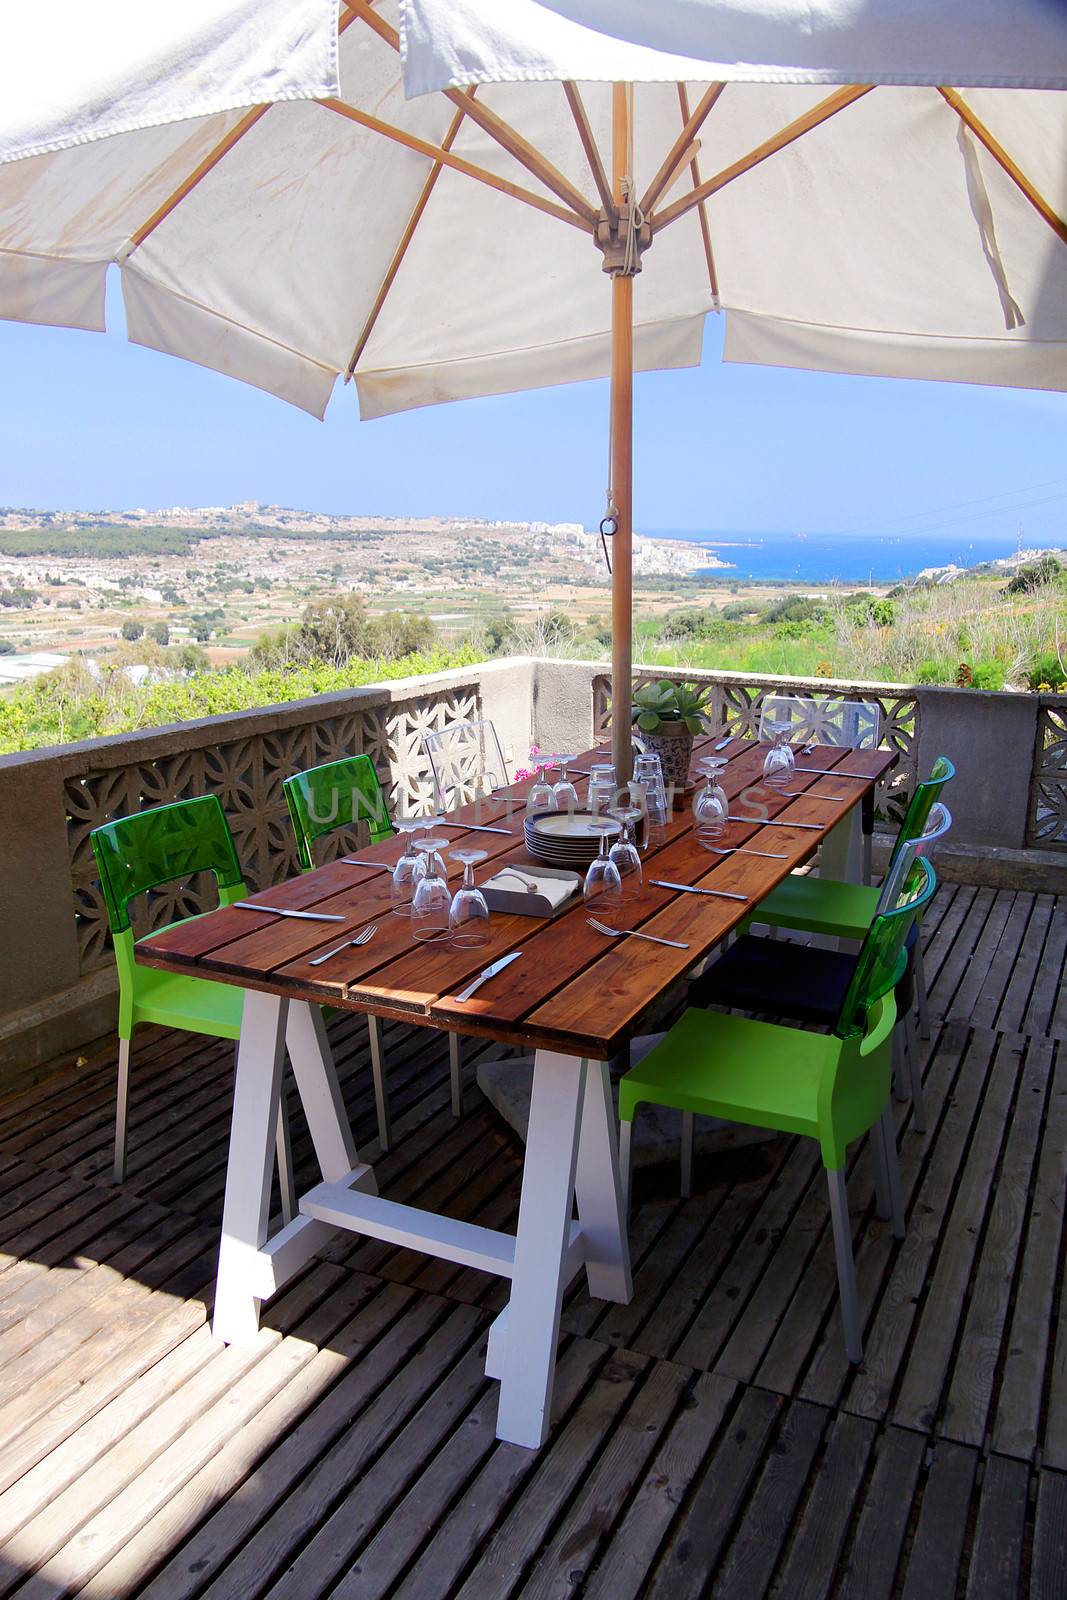 A terrace overlooking the sea with a table set for lunch or dinner